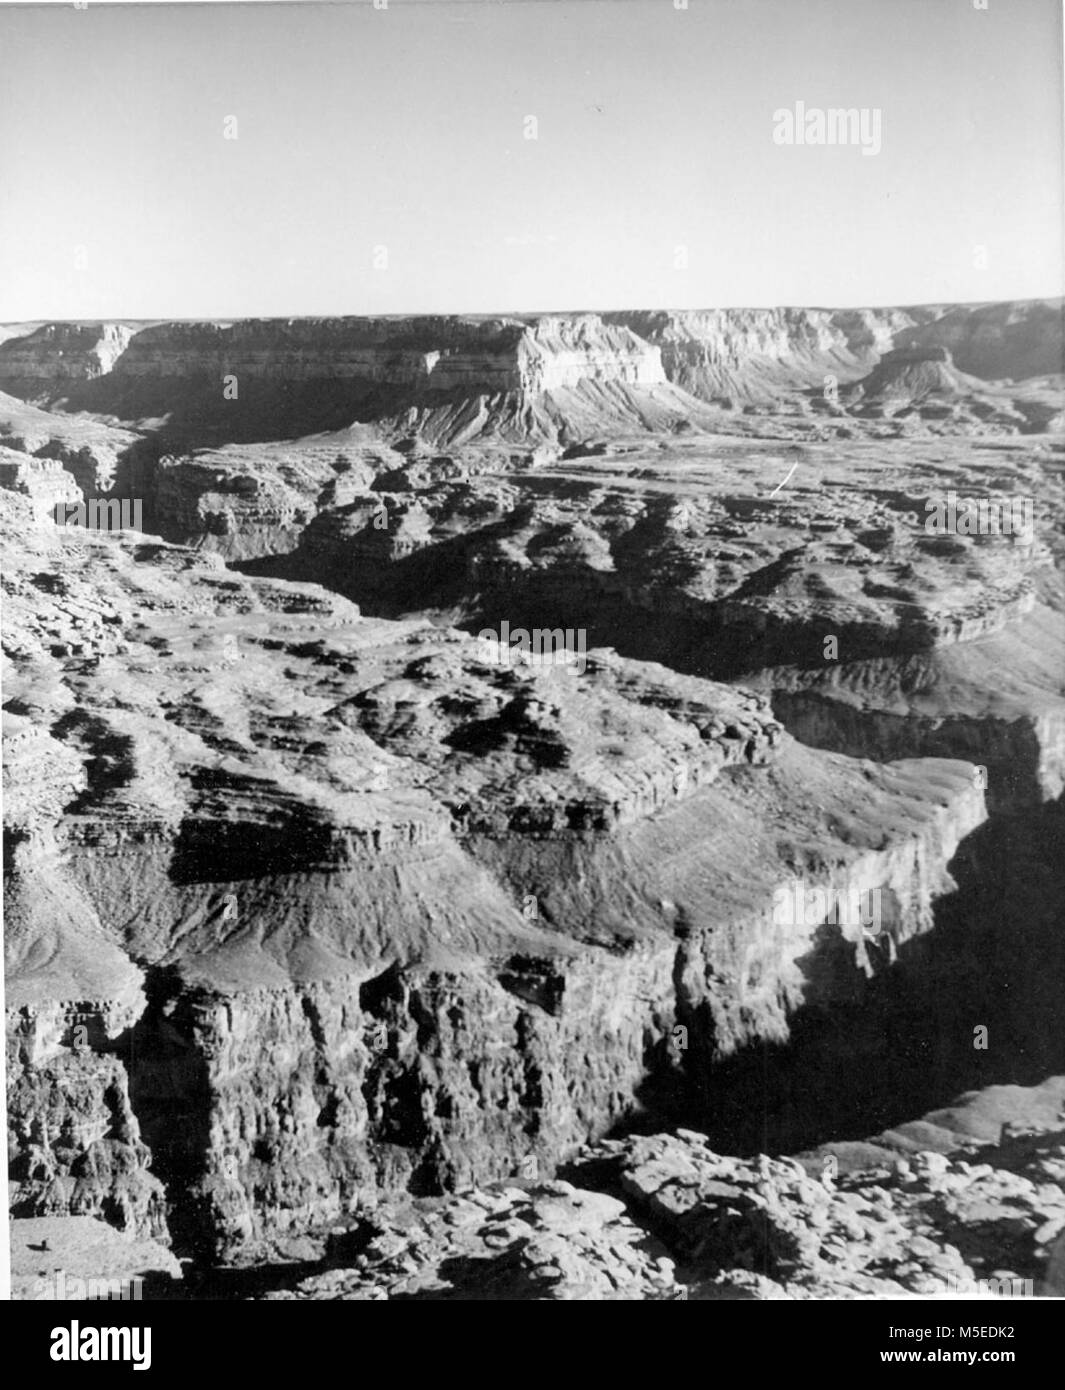 Grand Canyon Kanab Point  JUNCTION OF KANAB CREEK CANYON (ENTERING FROM LEFT) AND GRAND CANYON, AS SEEN FROM KANAB POINT, GRAND CANYON NATIONAL MONUMENT.   CIRCA 1951. Stock Photo